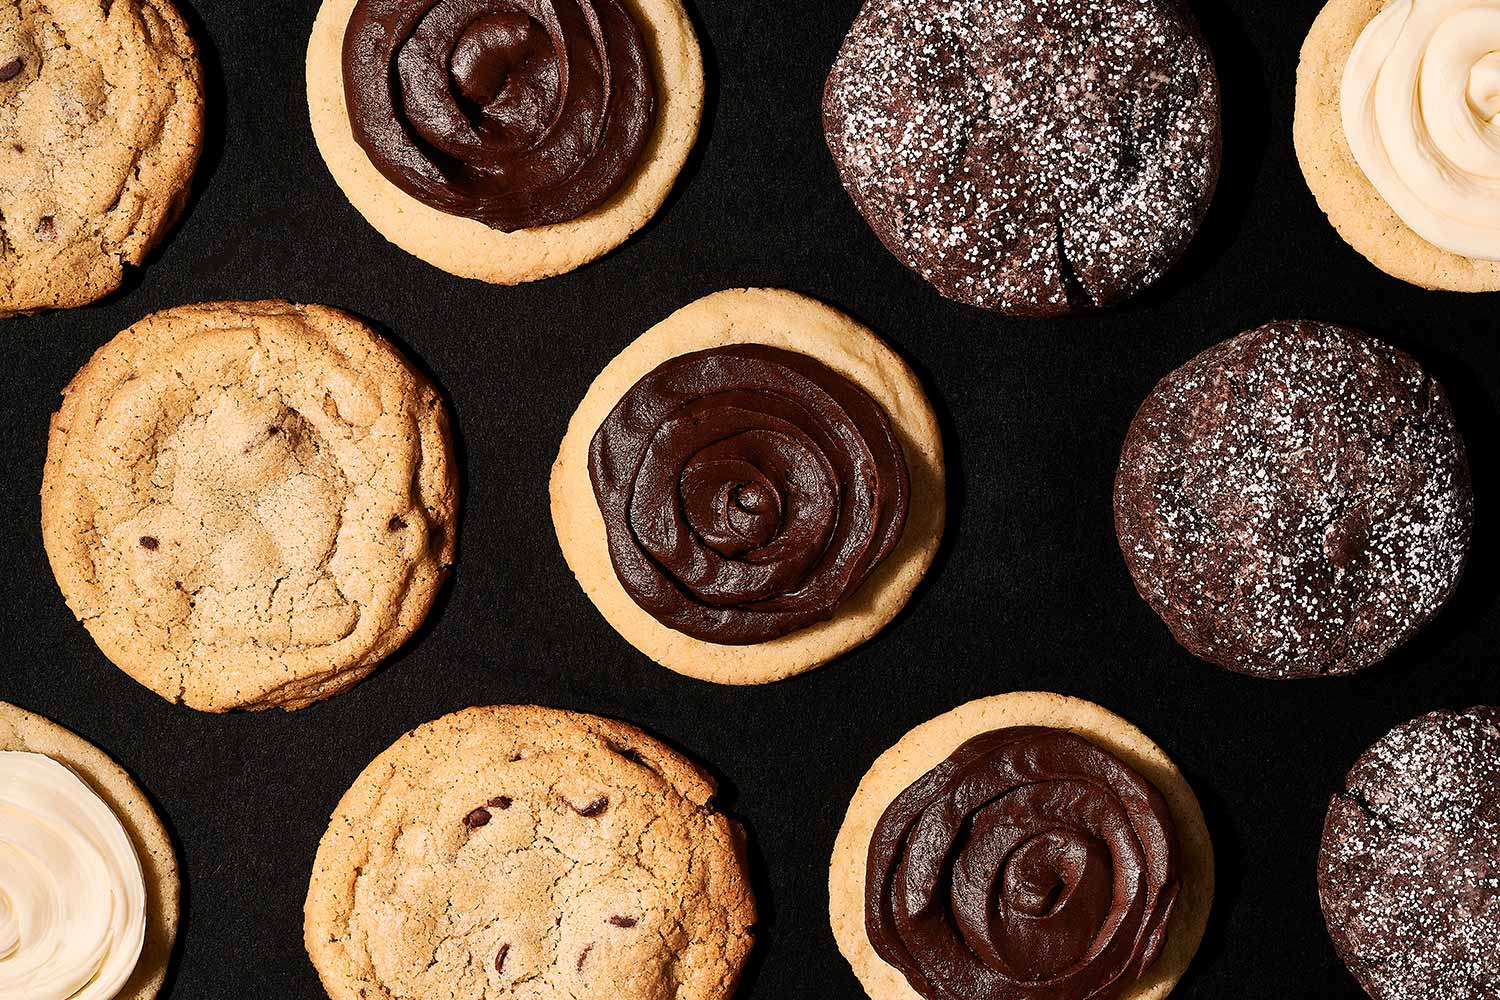 Eleven different cookies with various toppings on a black background.